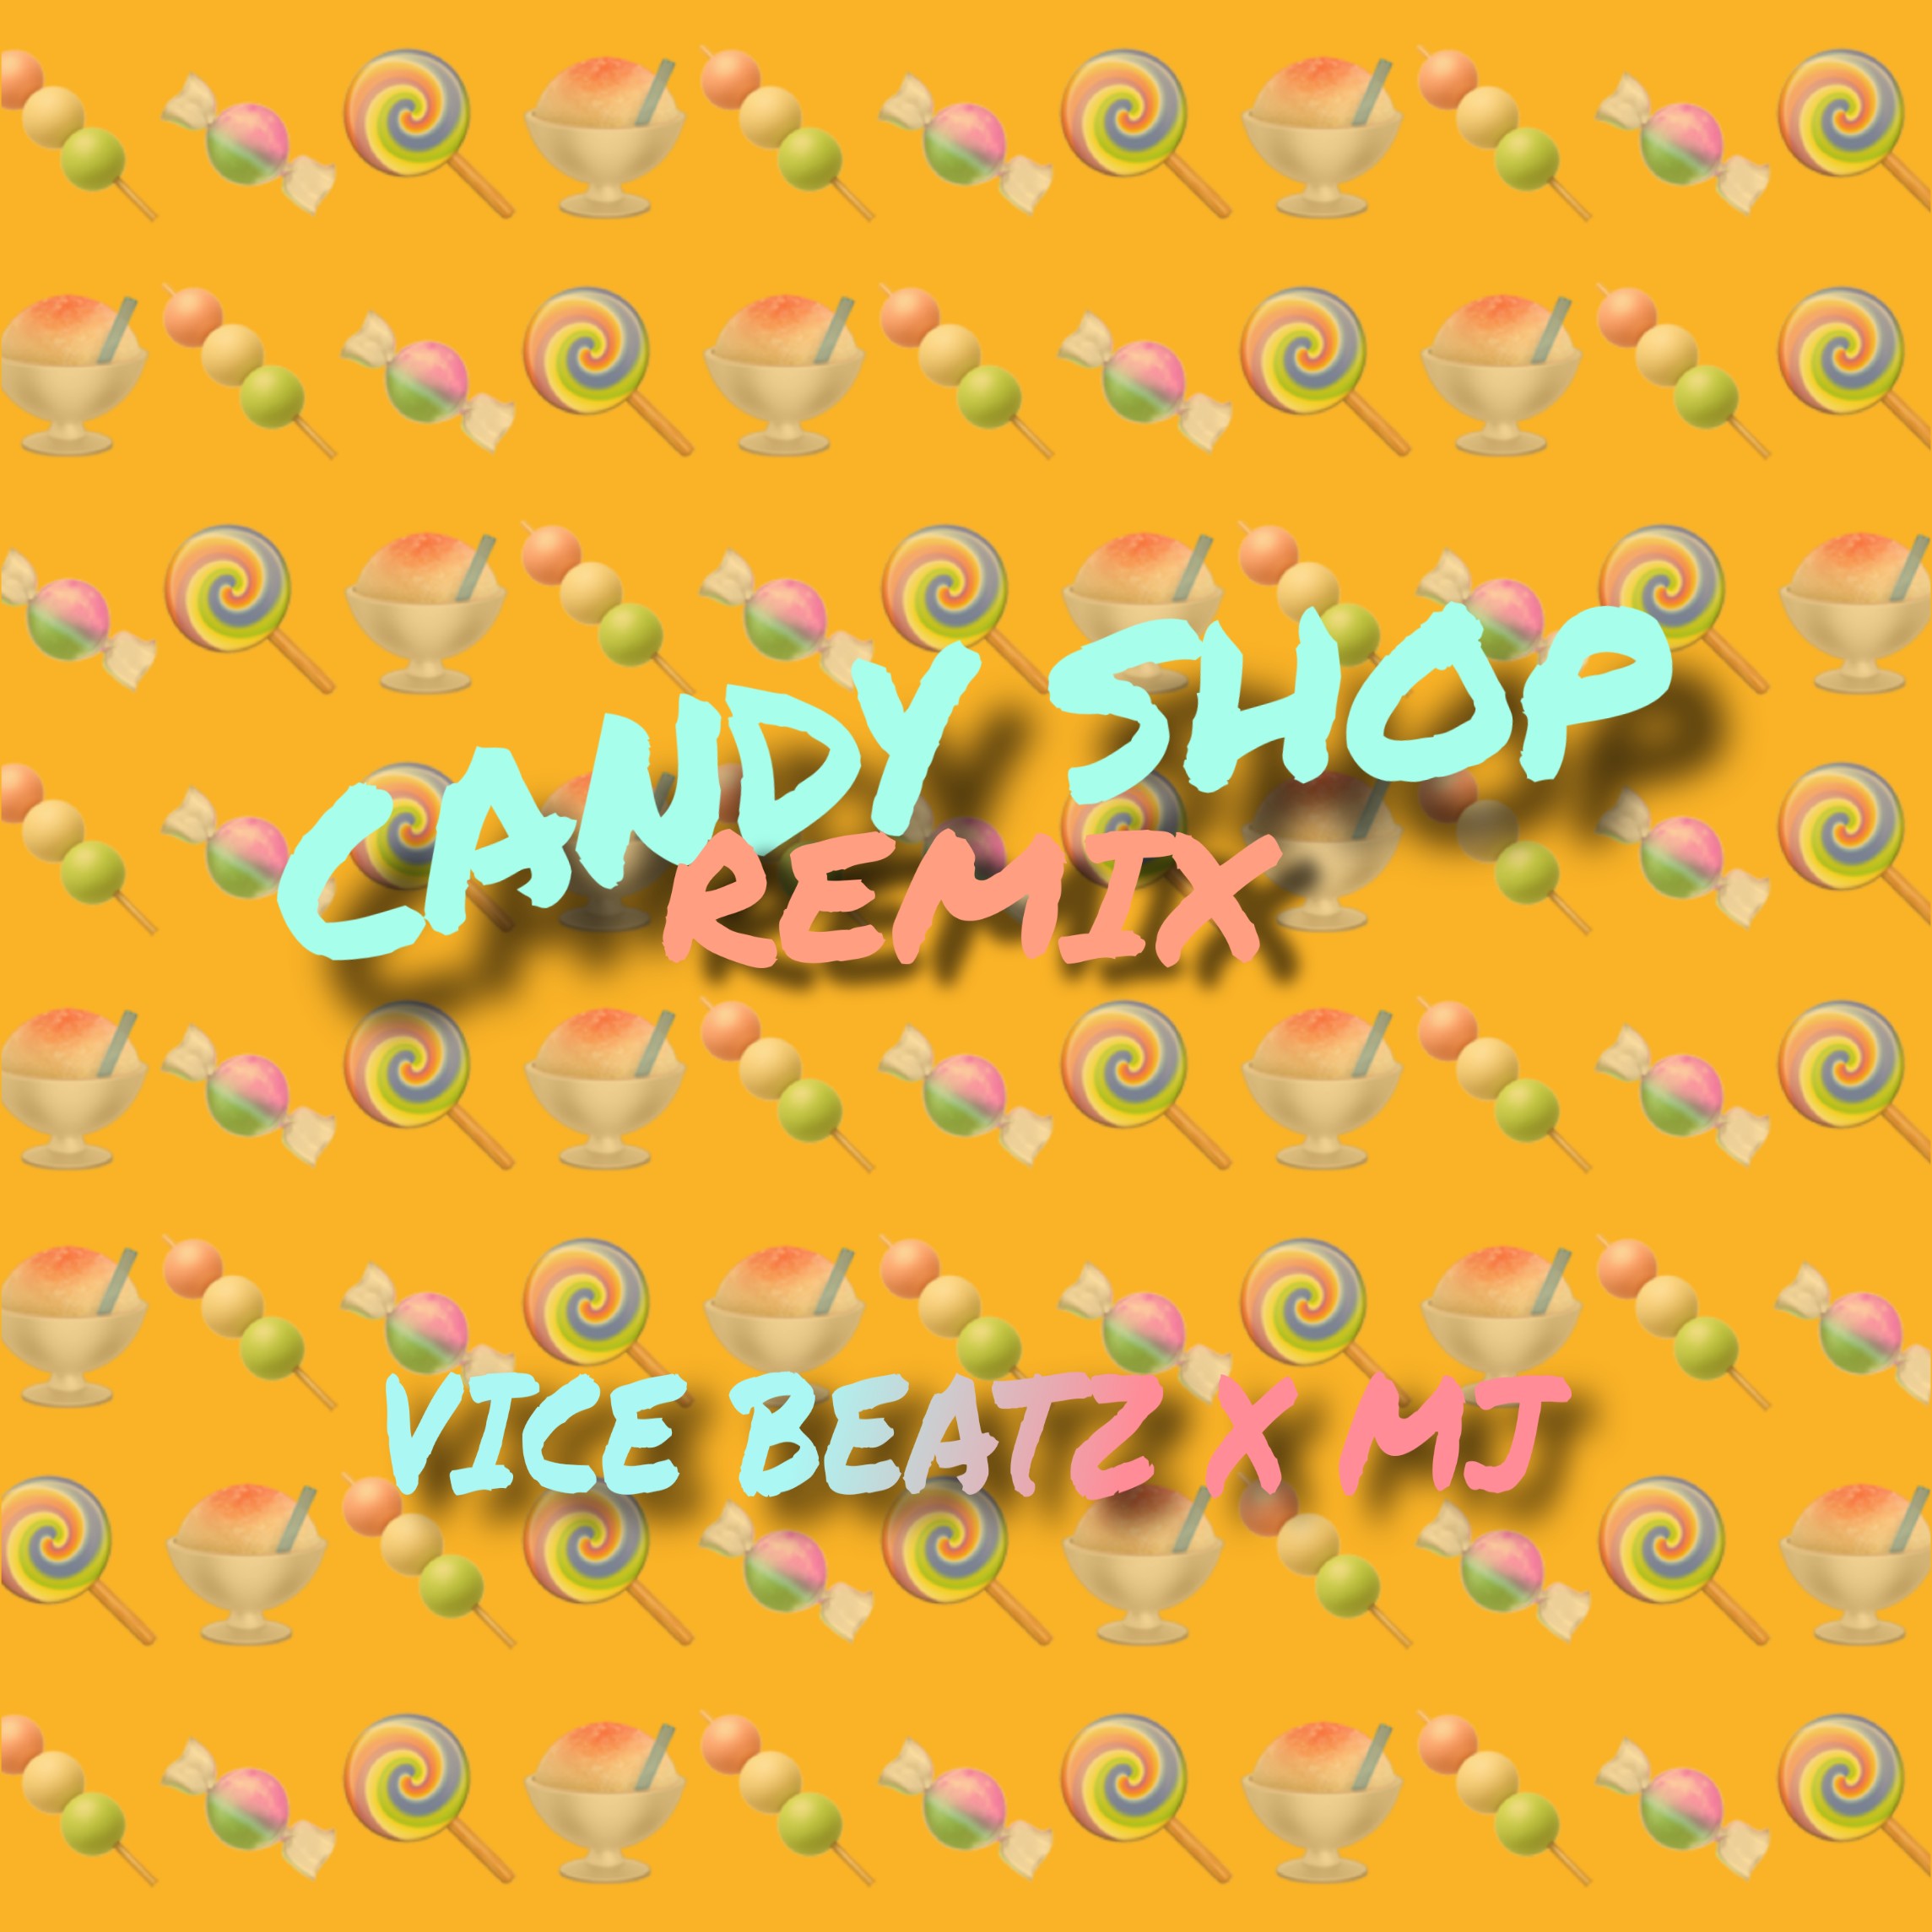 Prenesi Candy Shop (Vice_Beatz & MJ Remix)_ CLICK ON 'BUY' For Free Download